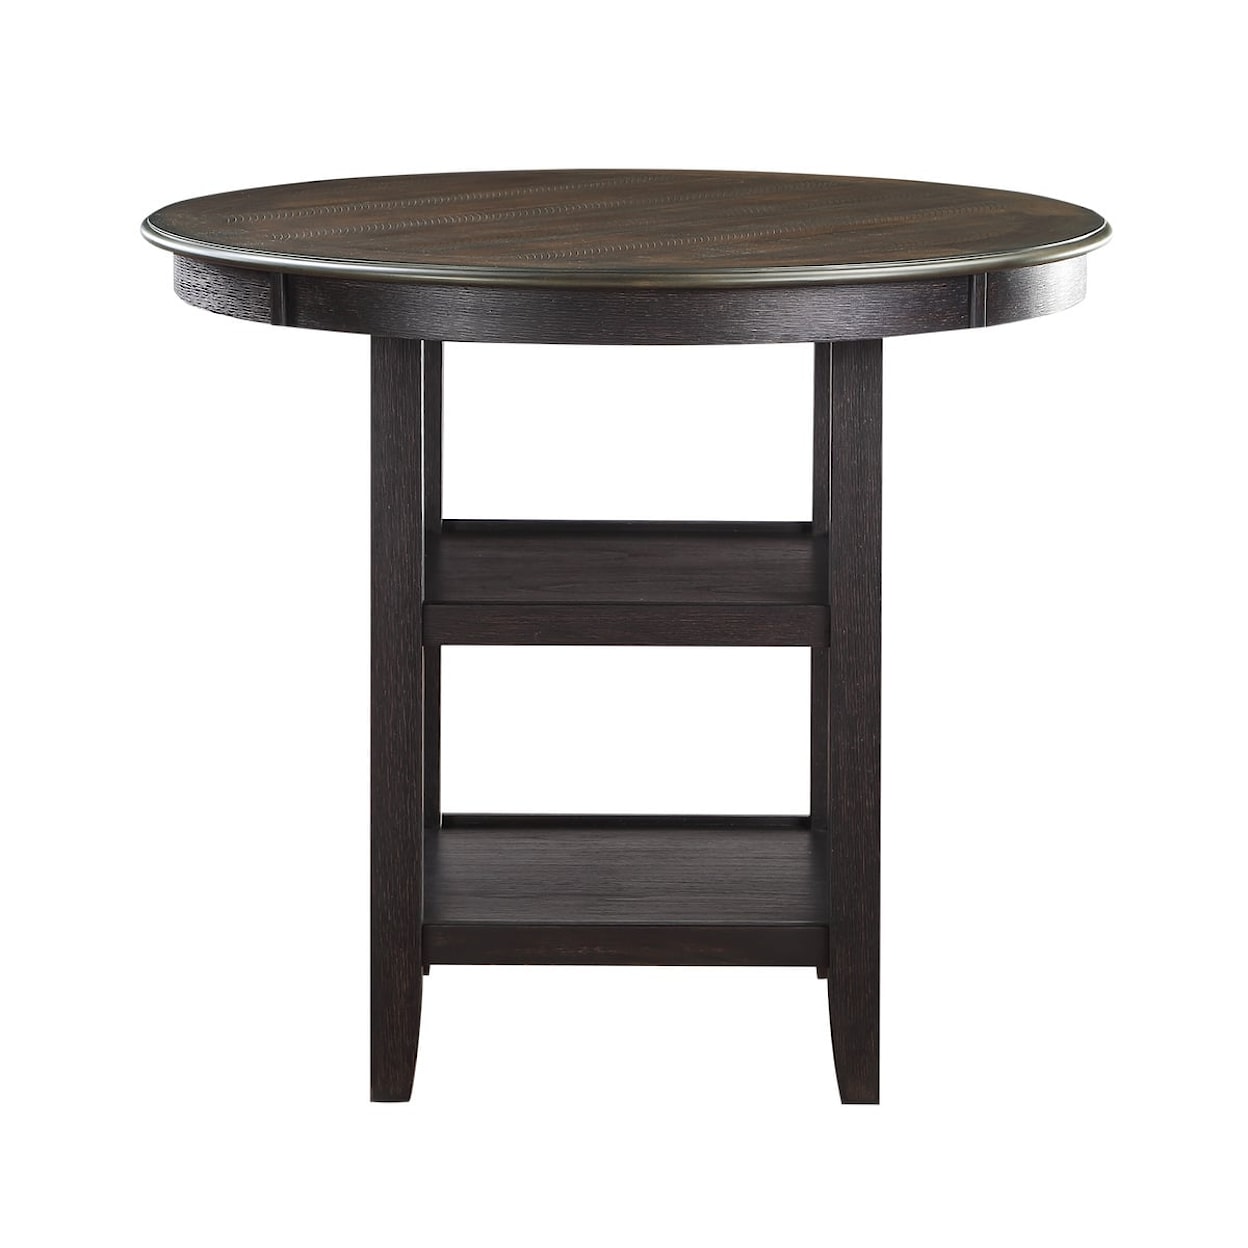 Homelegance Asher Counter Height Table